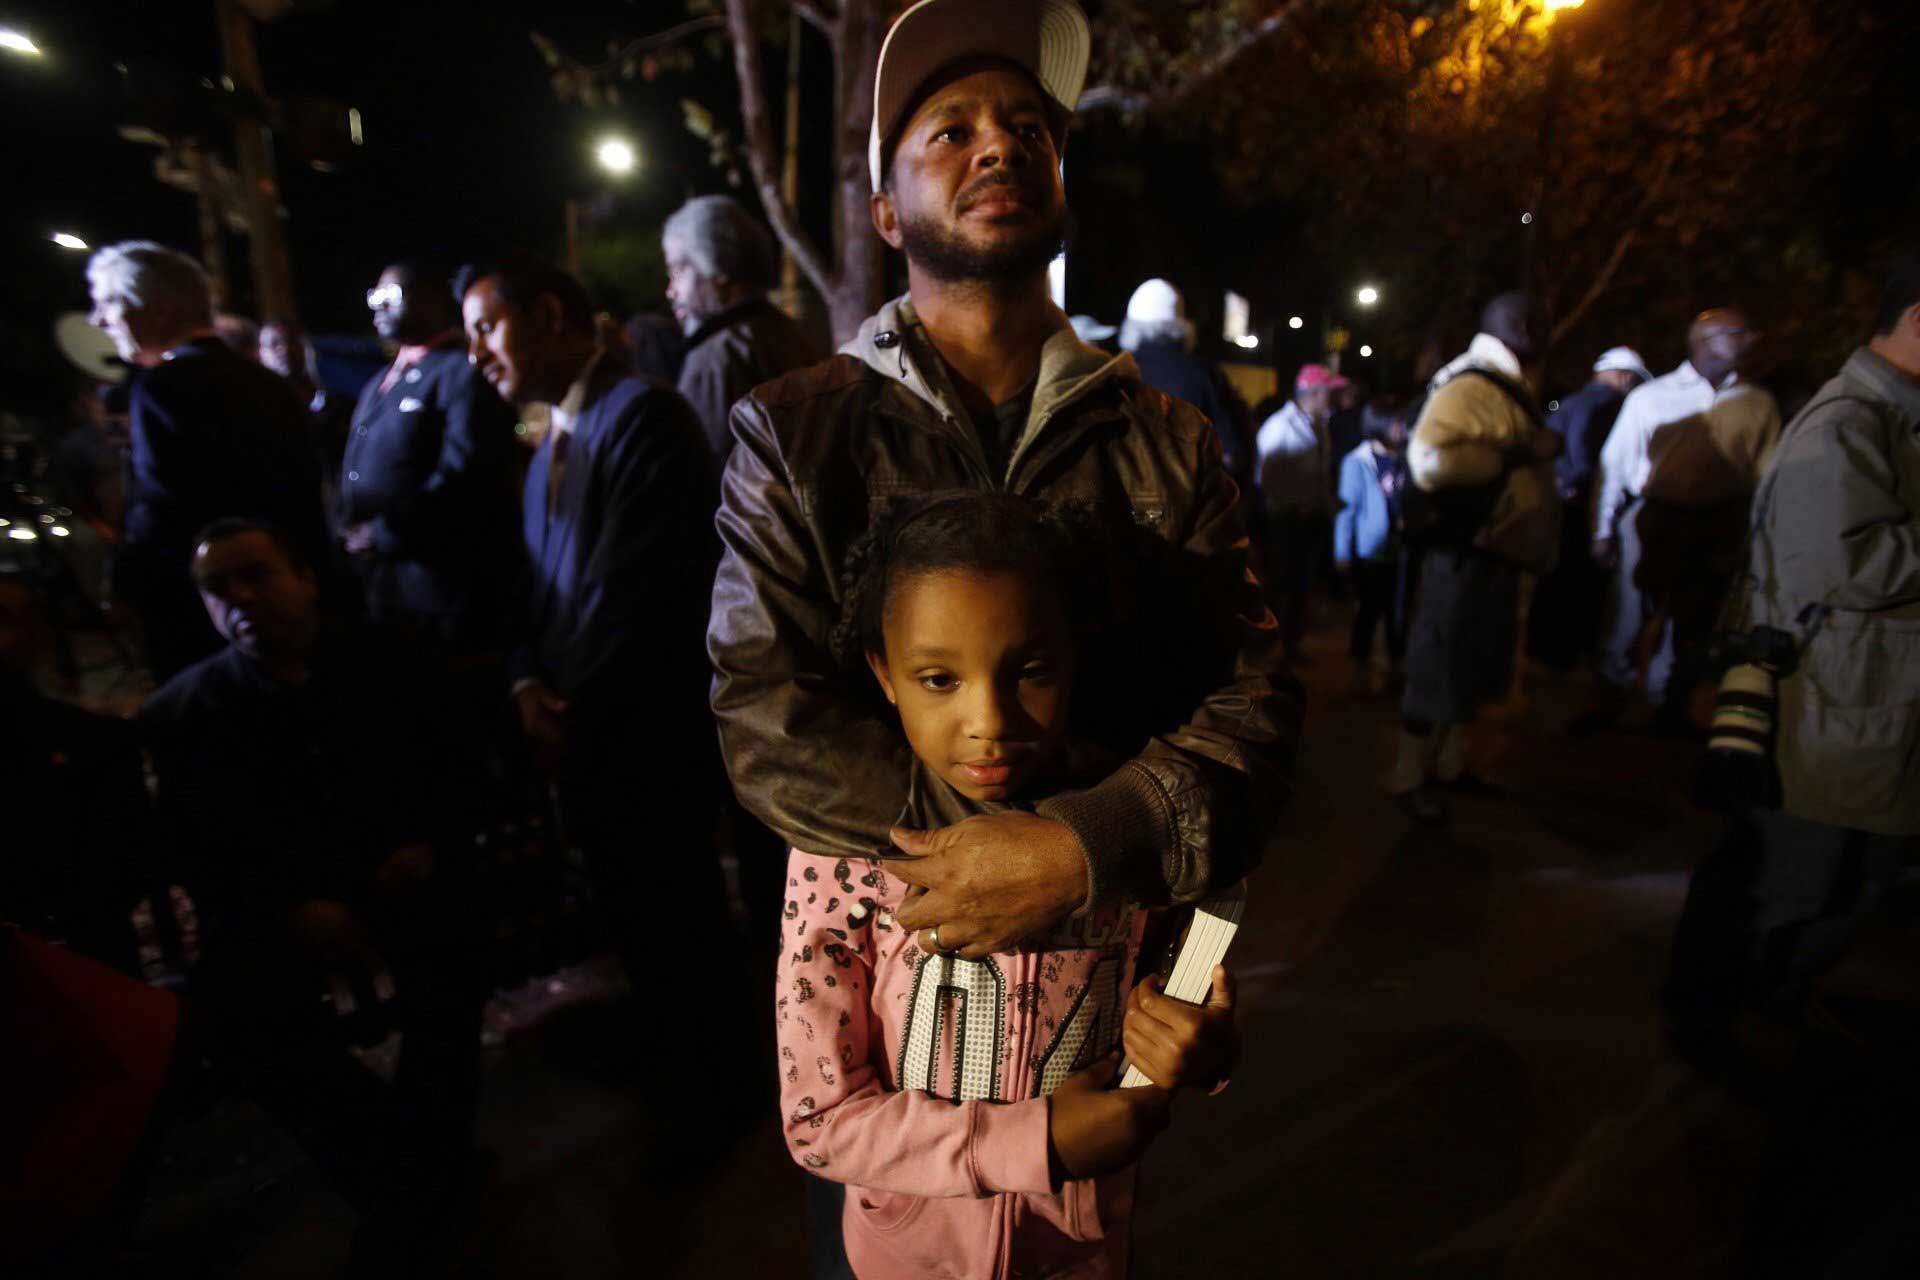 Donald Fields, 37, with daughter Olivia Fields, 9, at a Leimert Park gathering in Los Angeles on Nov. 24, 2014.